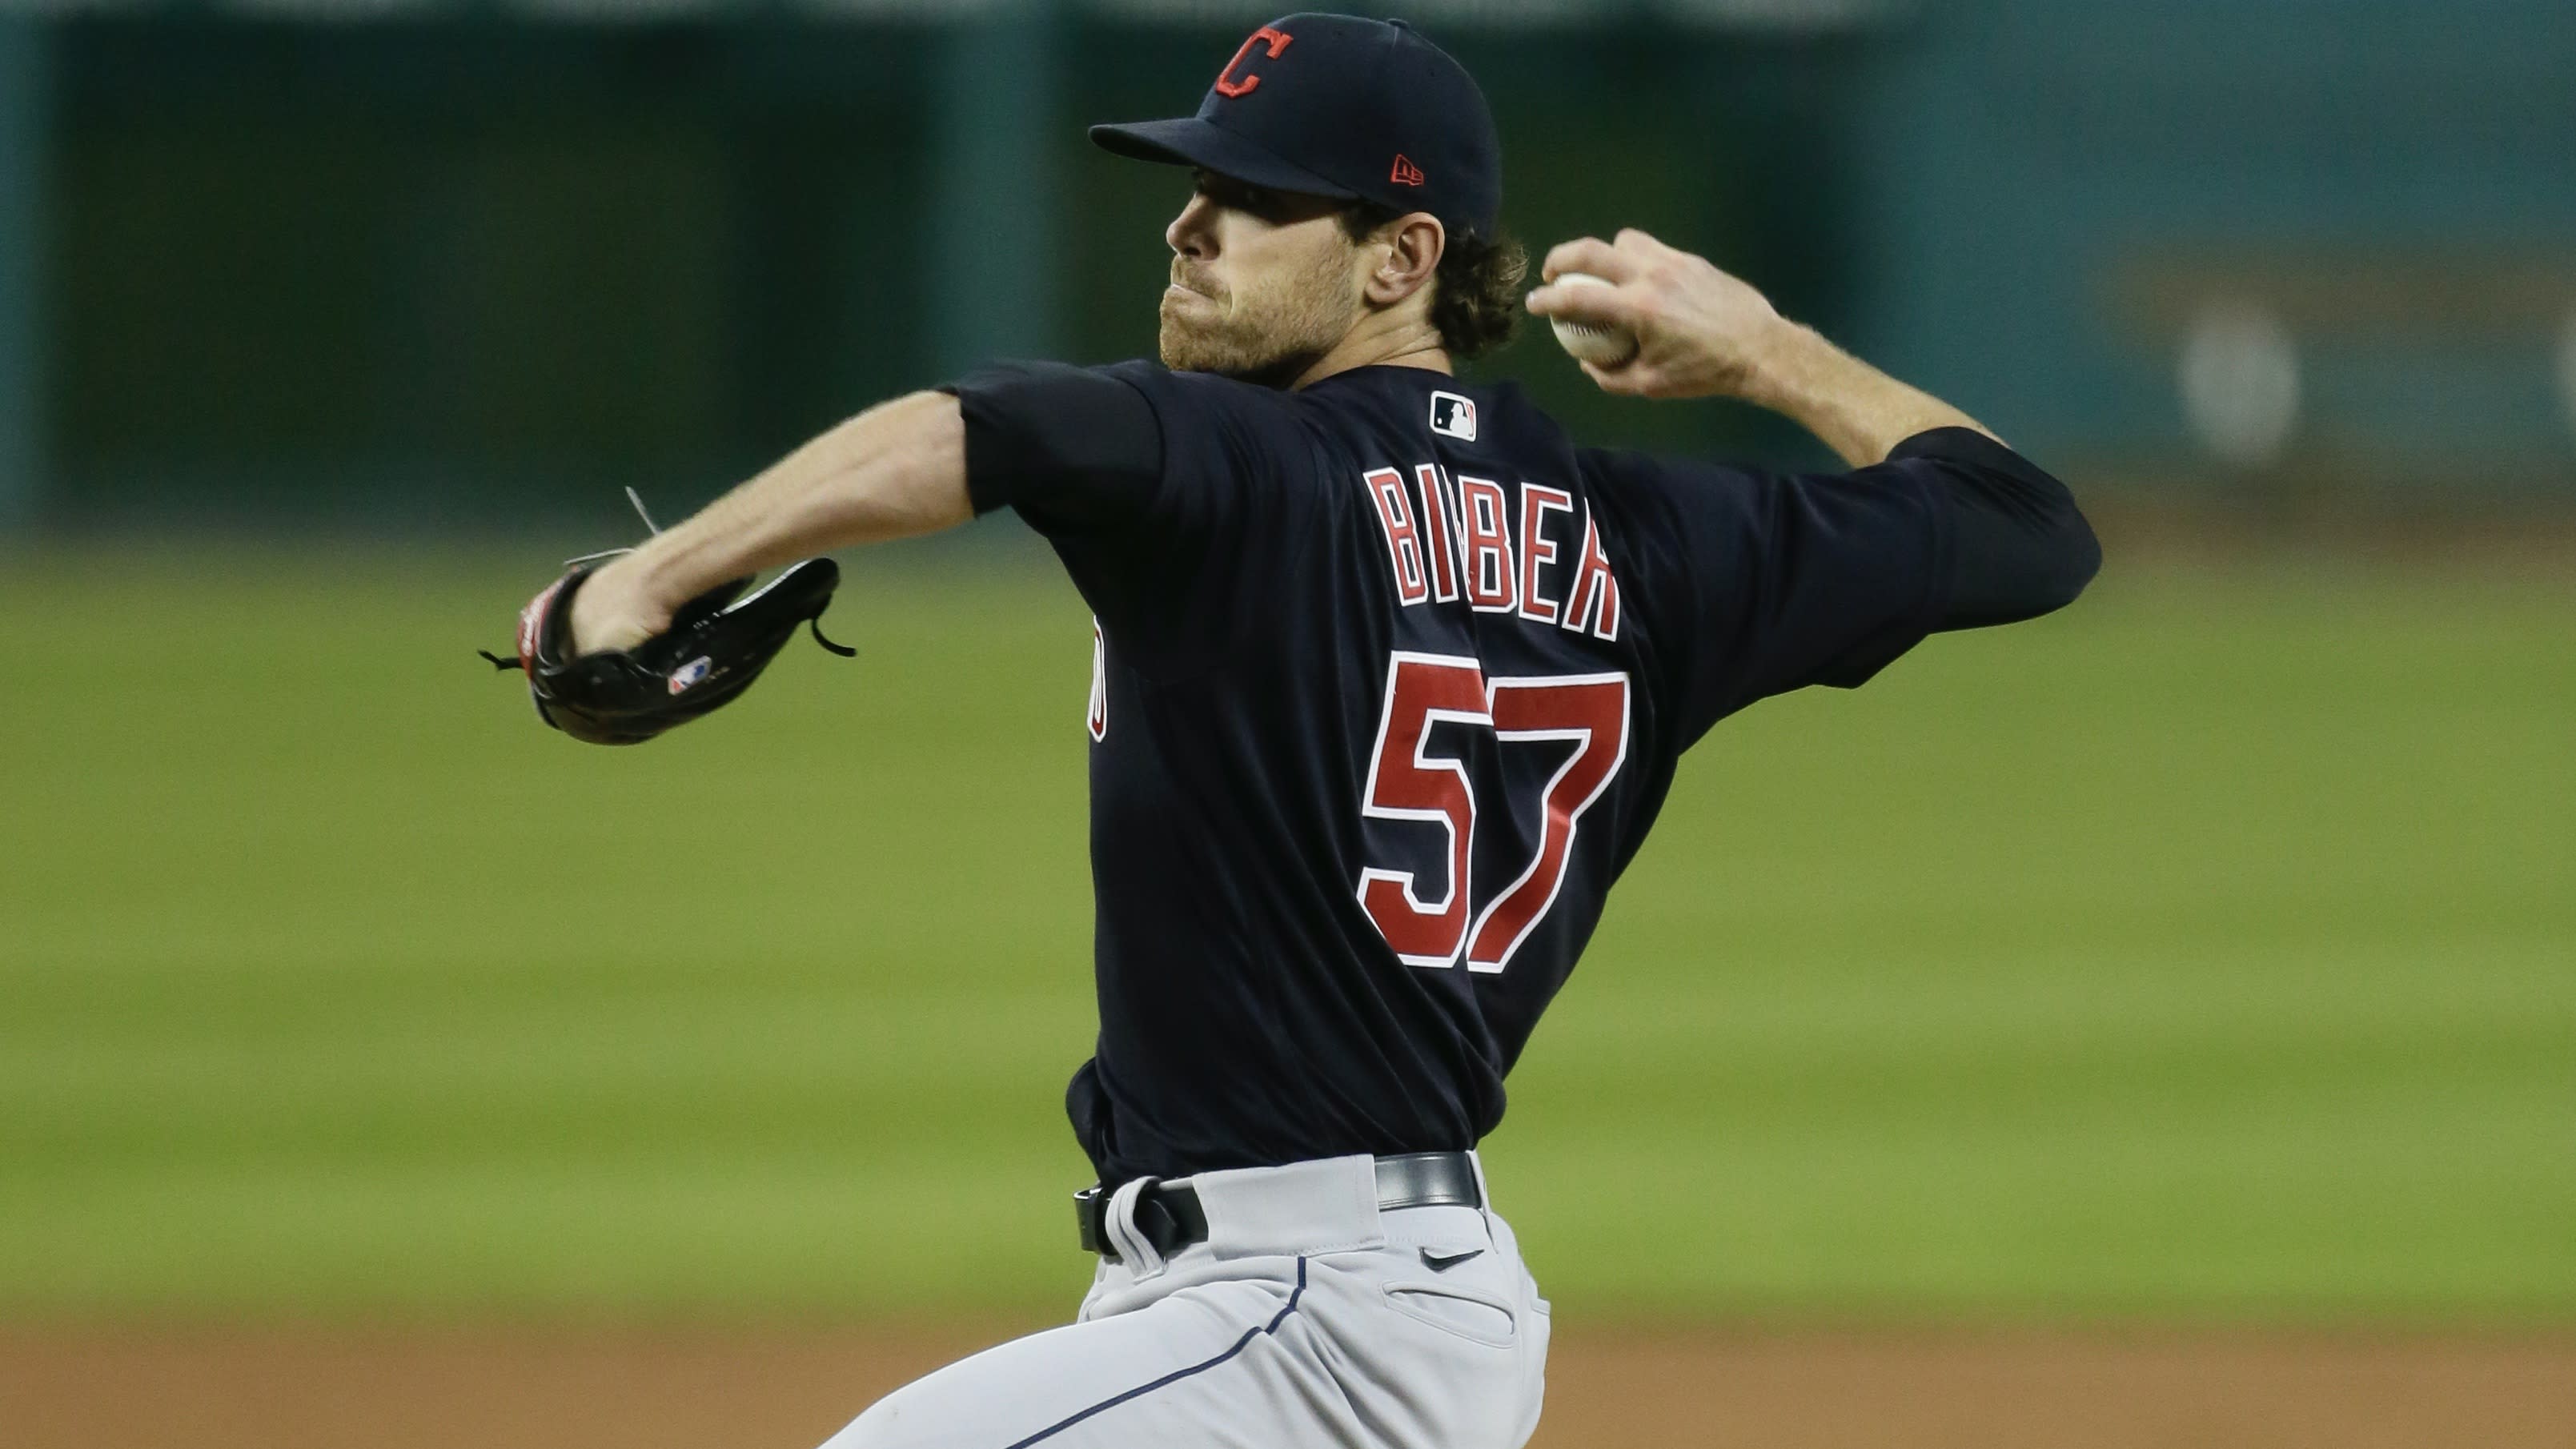 Injuries robbed Shane Bieber of another classic season - Covering